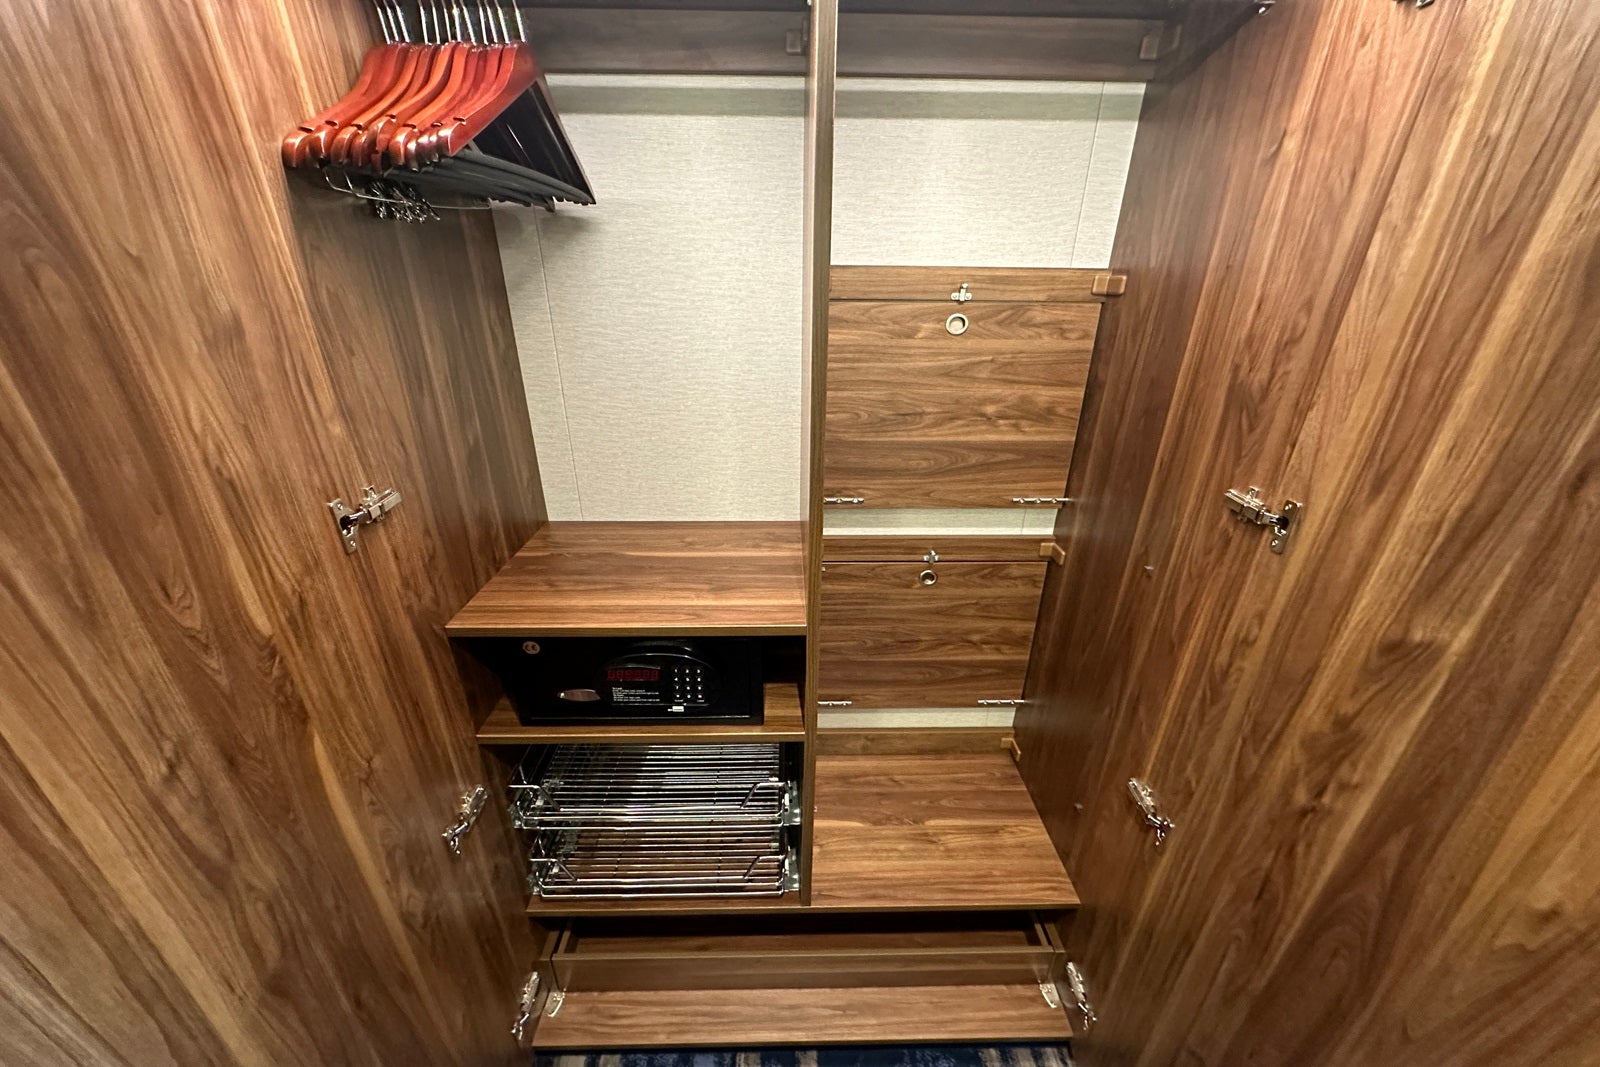 A wooden closet with wooden hangers and shelves, plus wire drawers and a safe